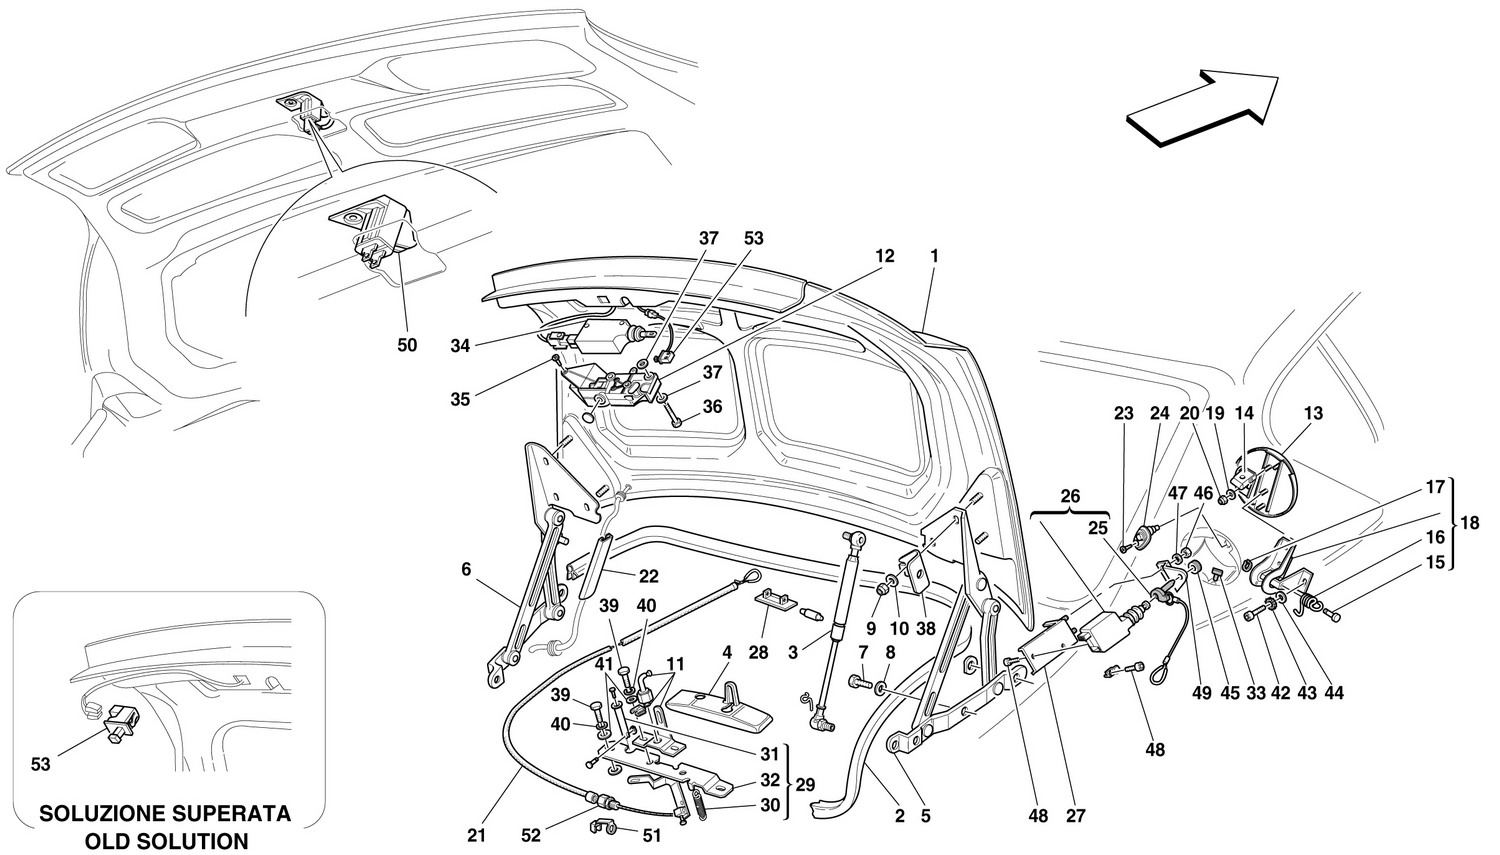 Schematic: Trunk Hood Bonnet And Petrol Cover